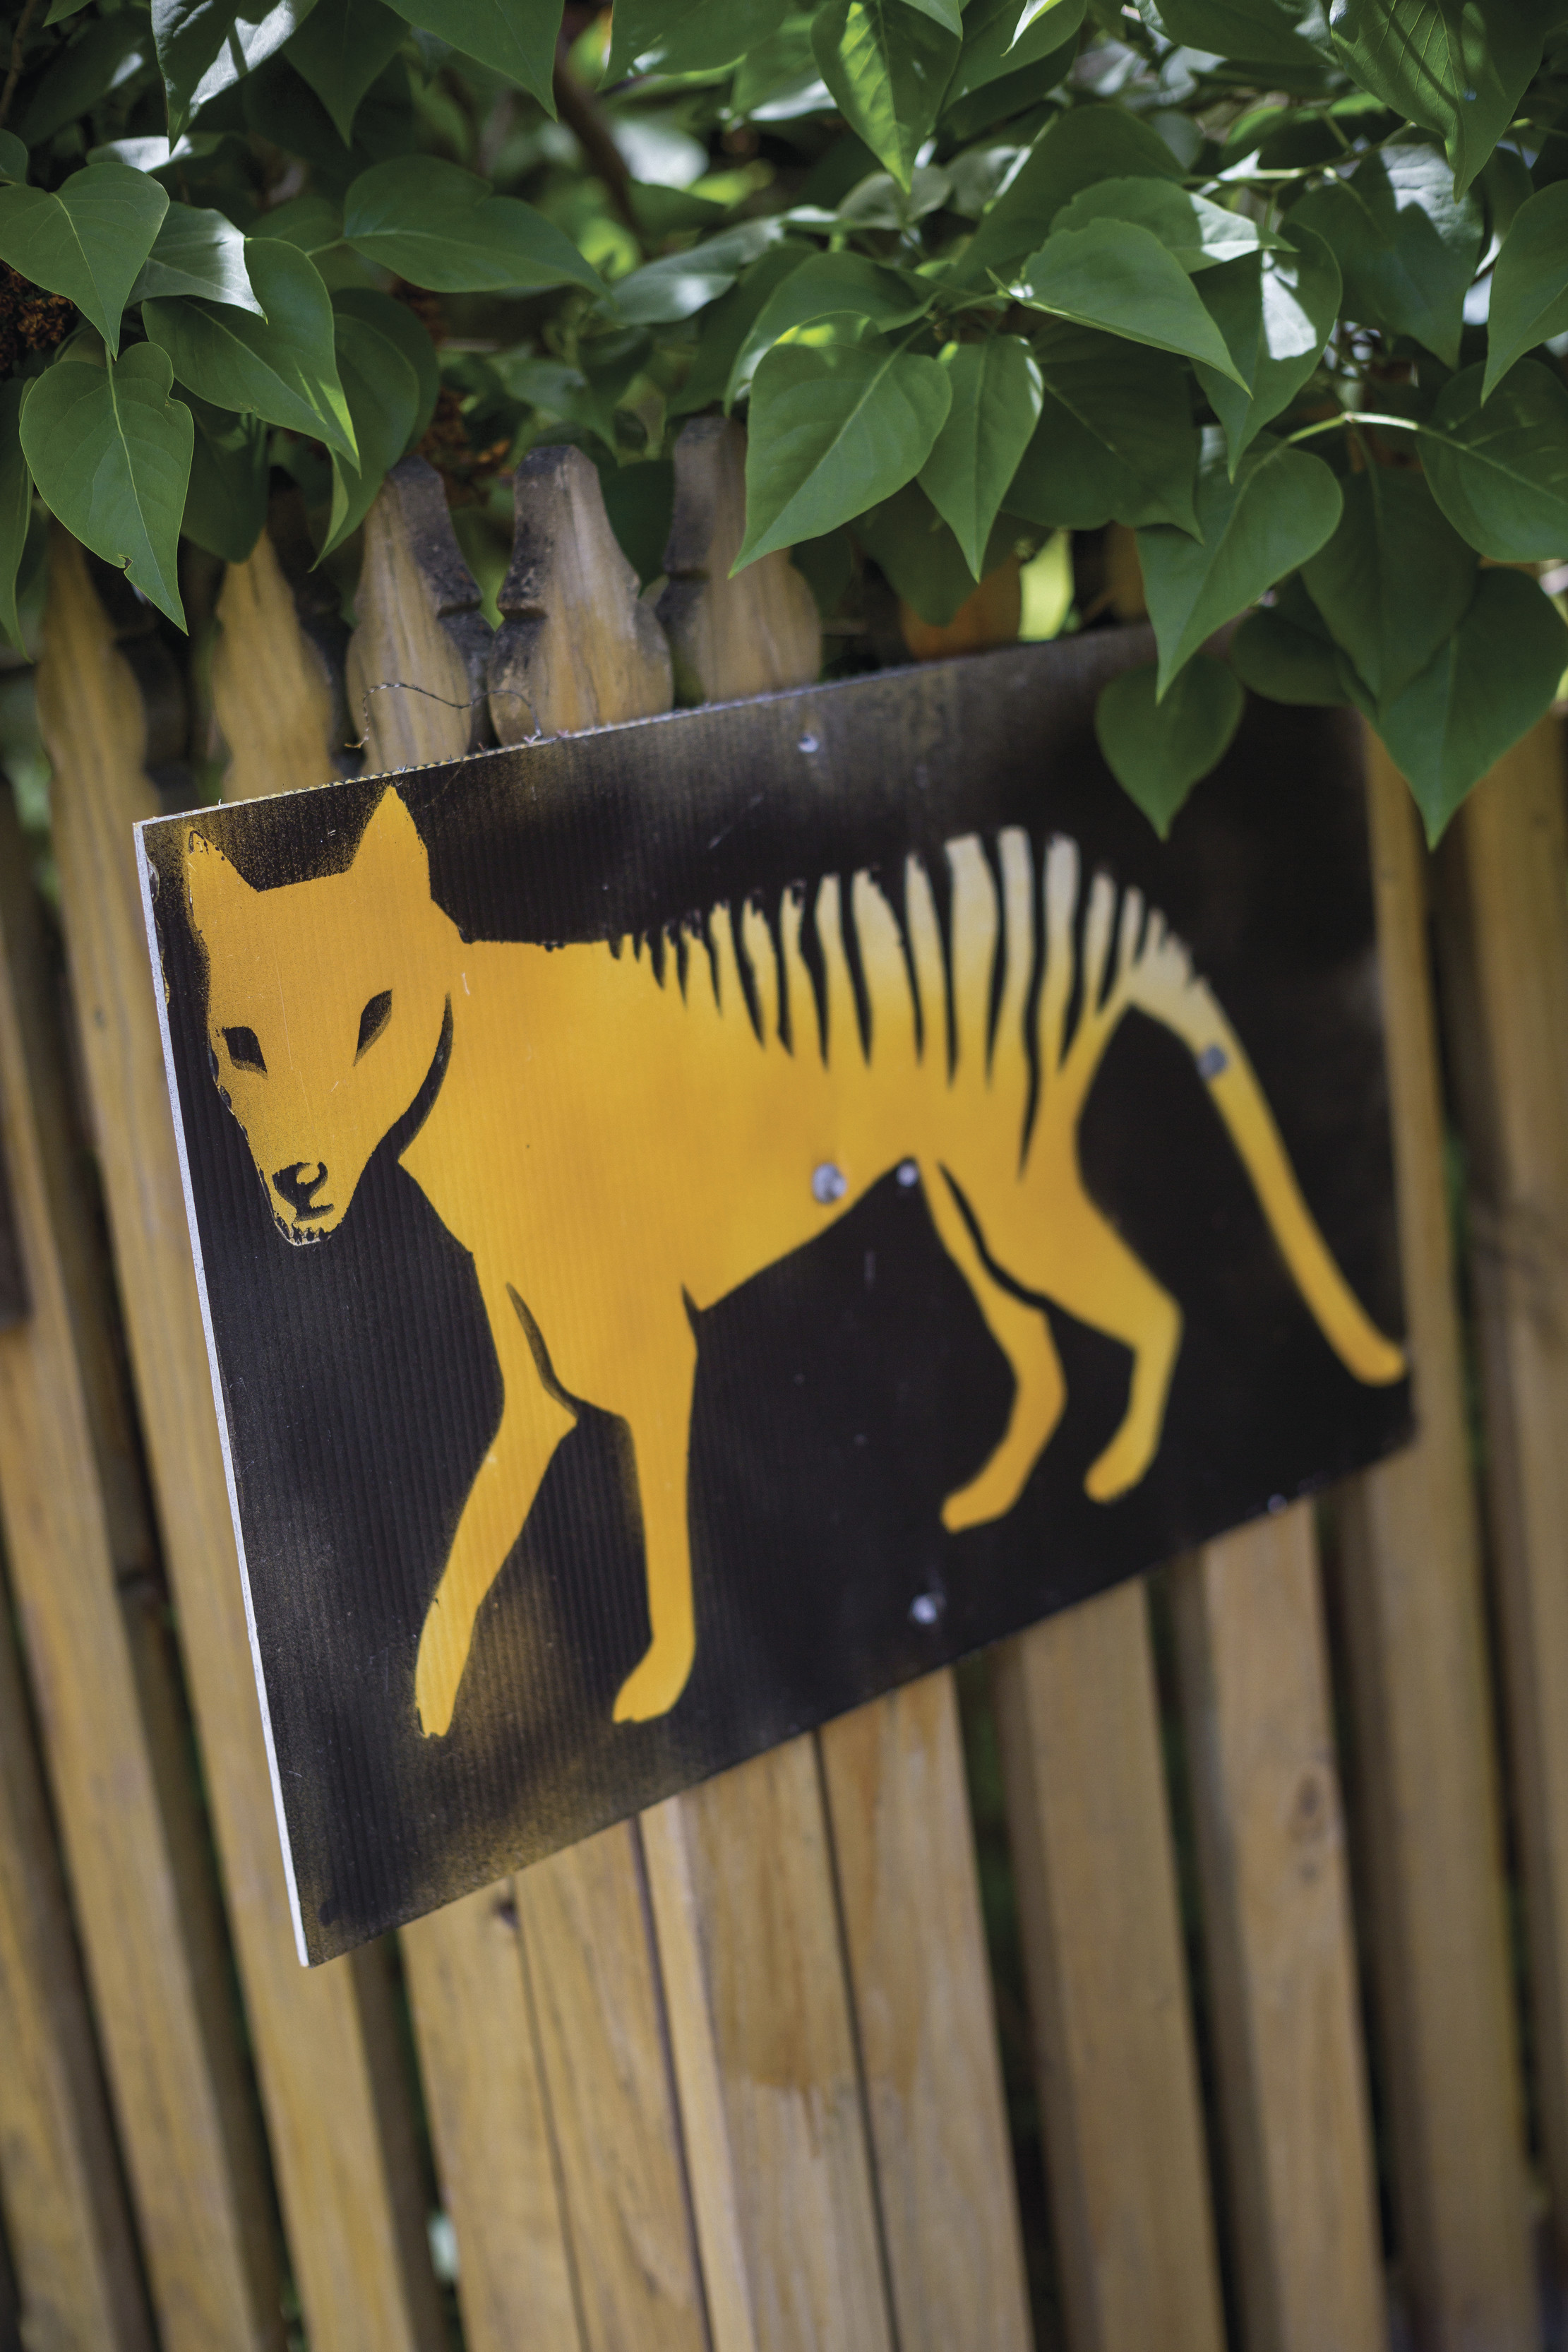 Spray painted yellow and black image of Tasmanian Tiger sign nailed to brown picket fence.